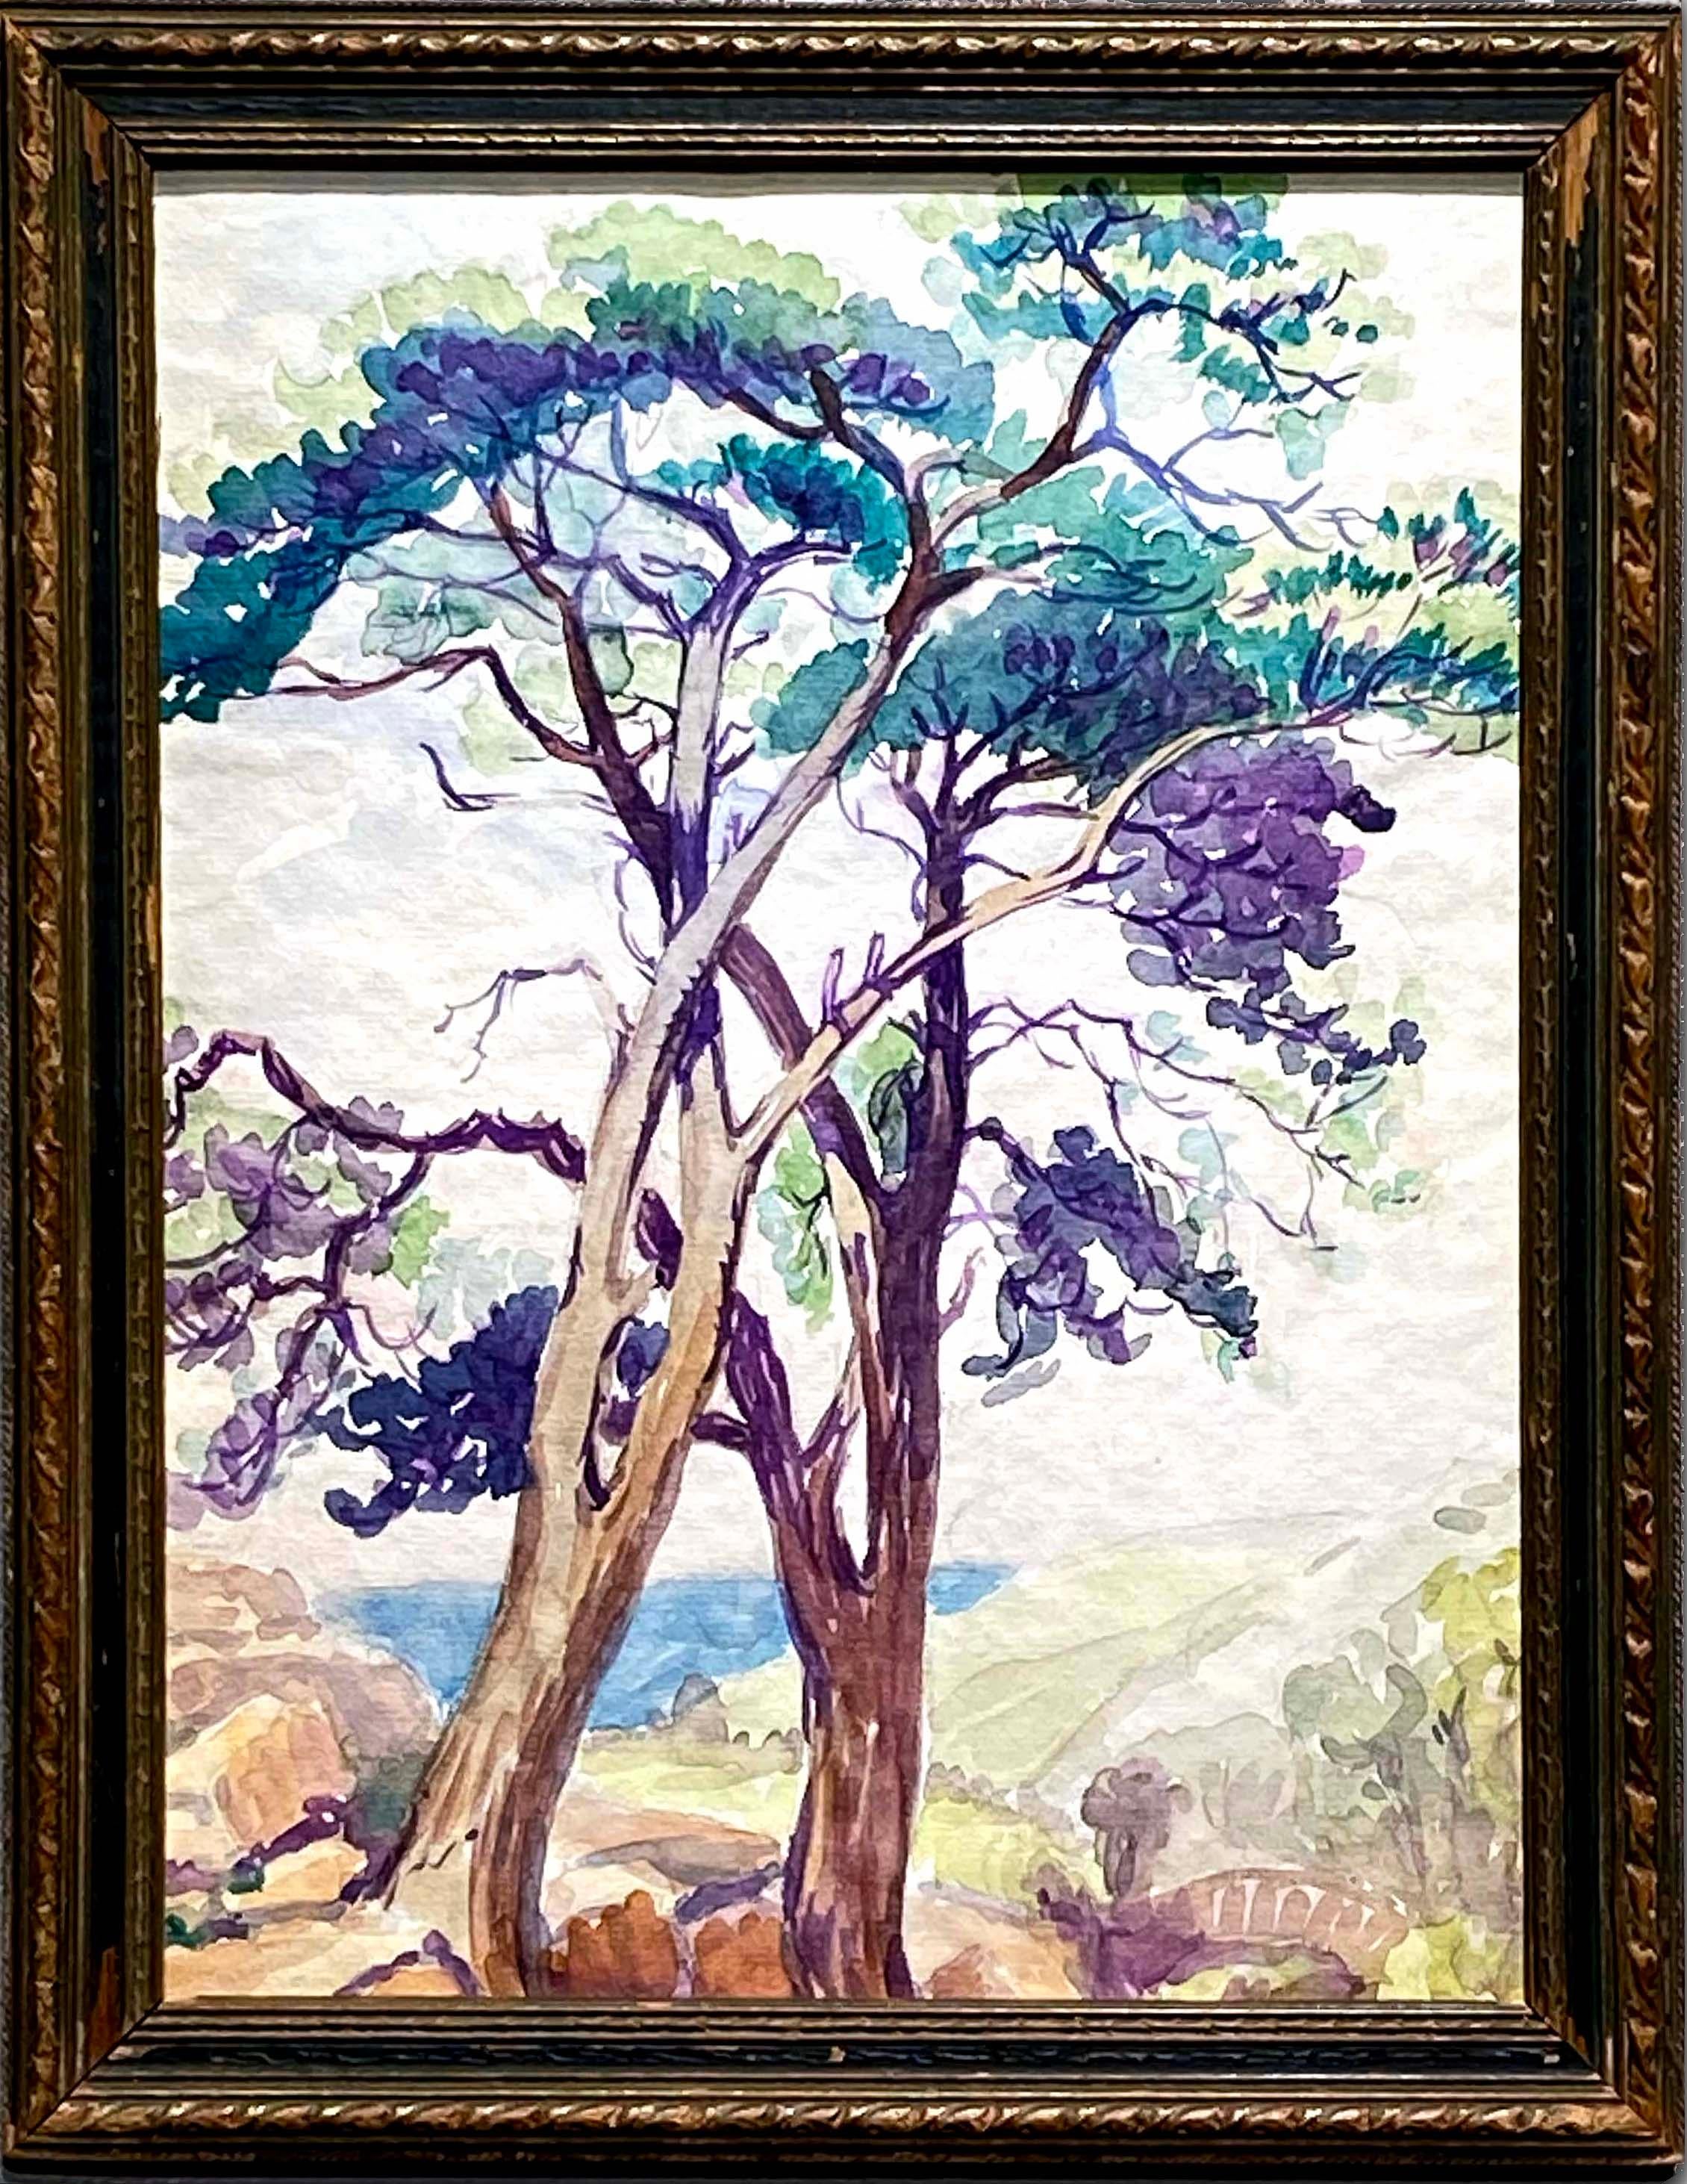 California Impressionist Landscape Painting Framed 19th Century Rare Purple - Art by Unknown